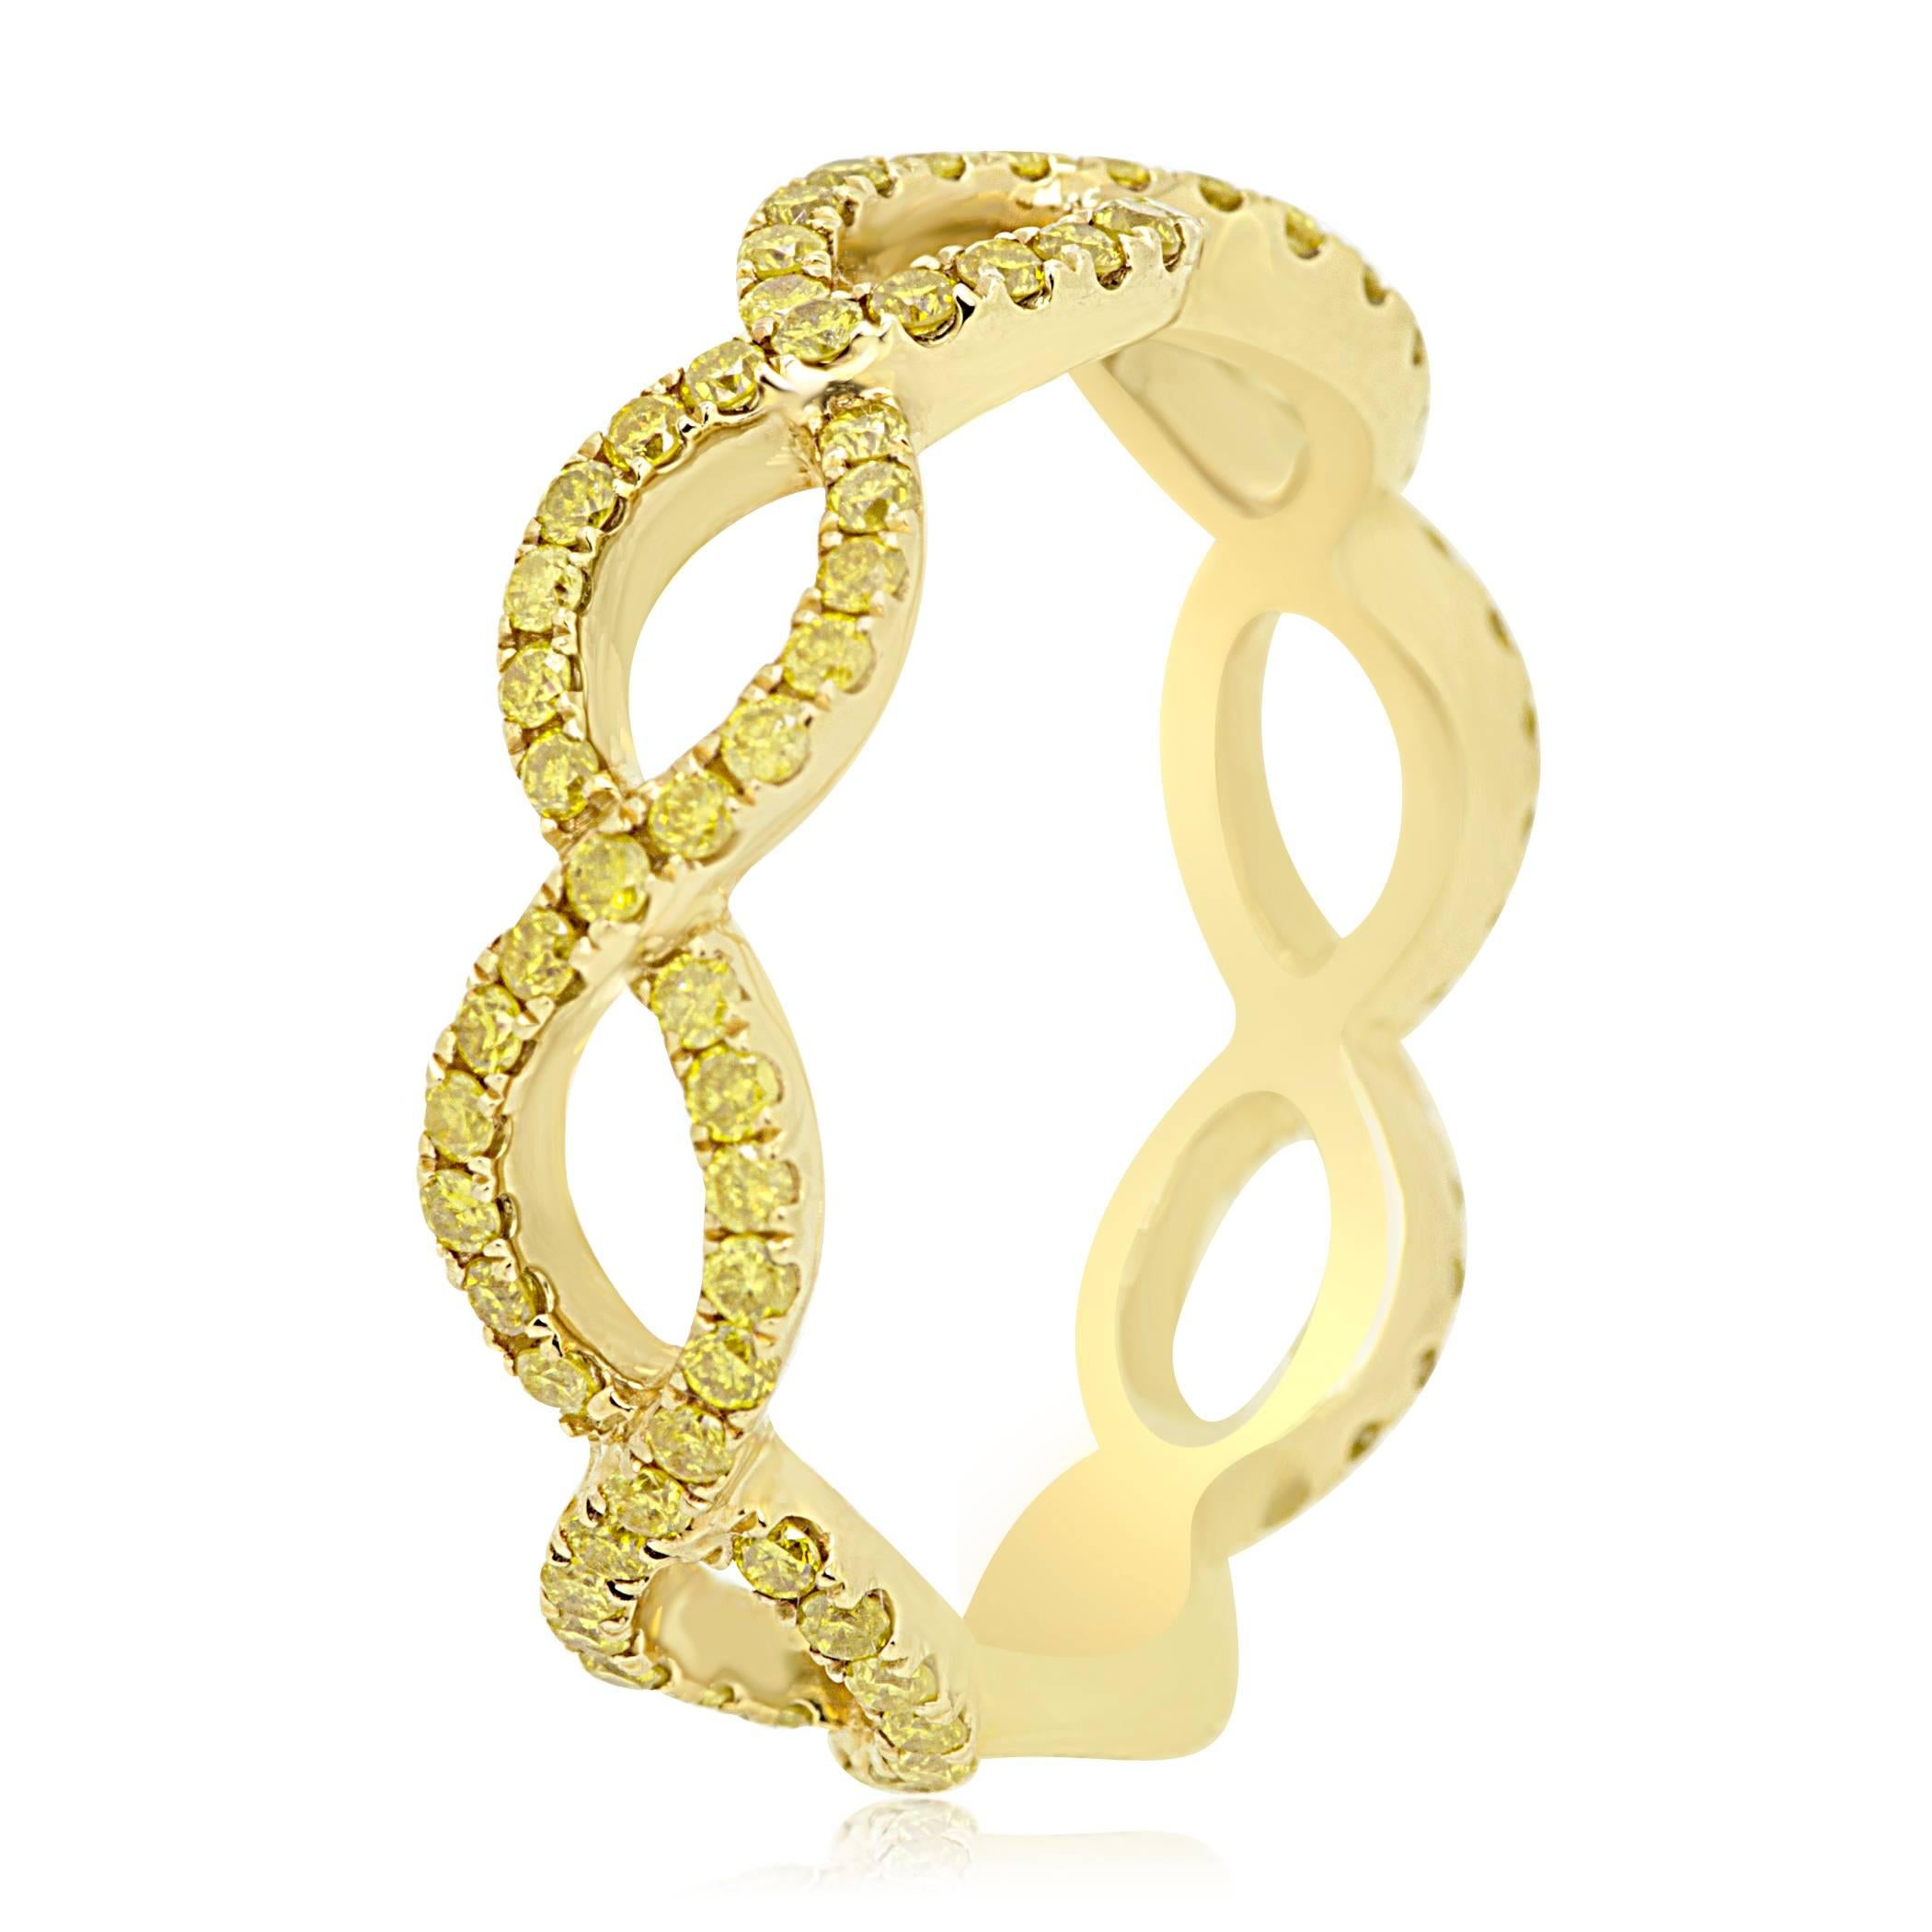 Natural Fancy Yellow Diamond 0.77 Carat in a twist rope style stackable band ring 14K Yellow Gold.